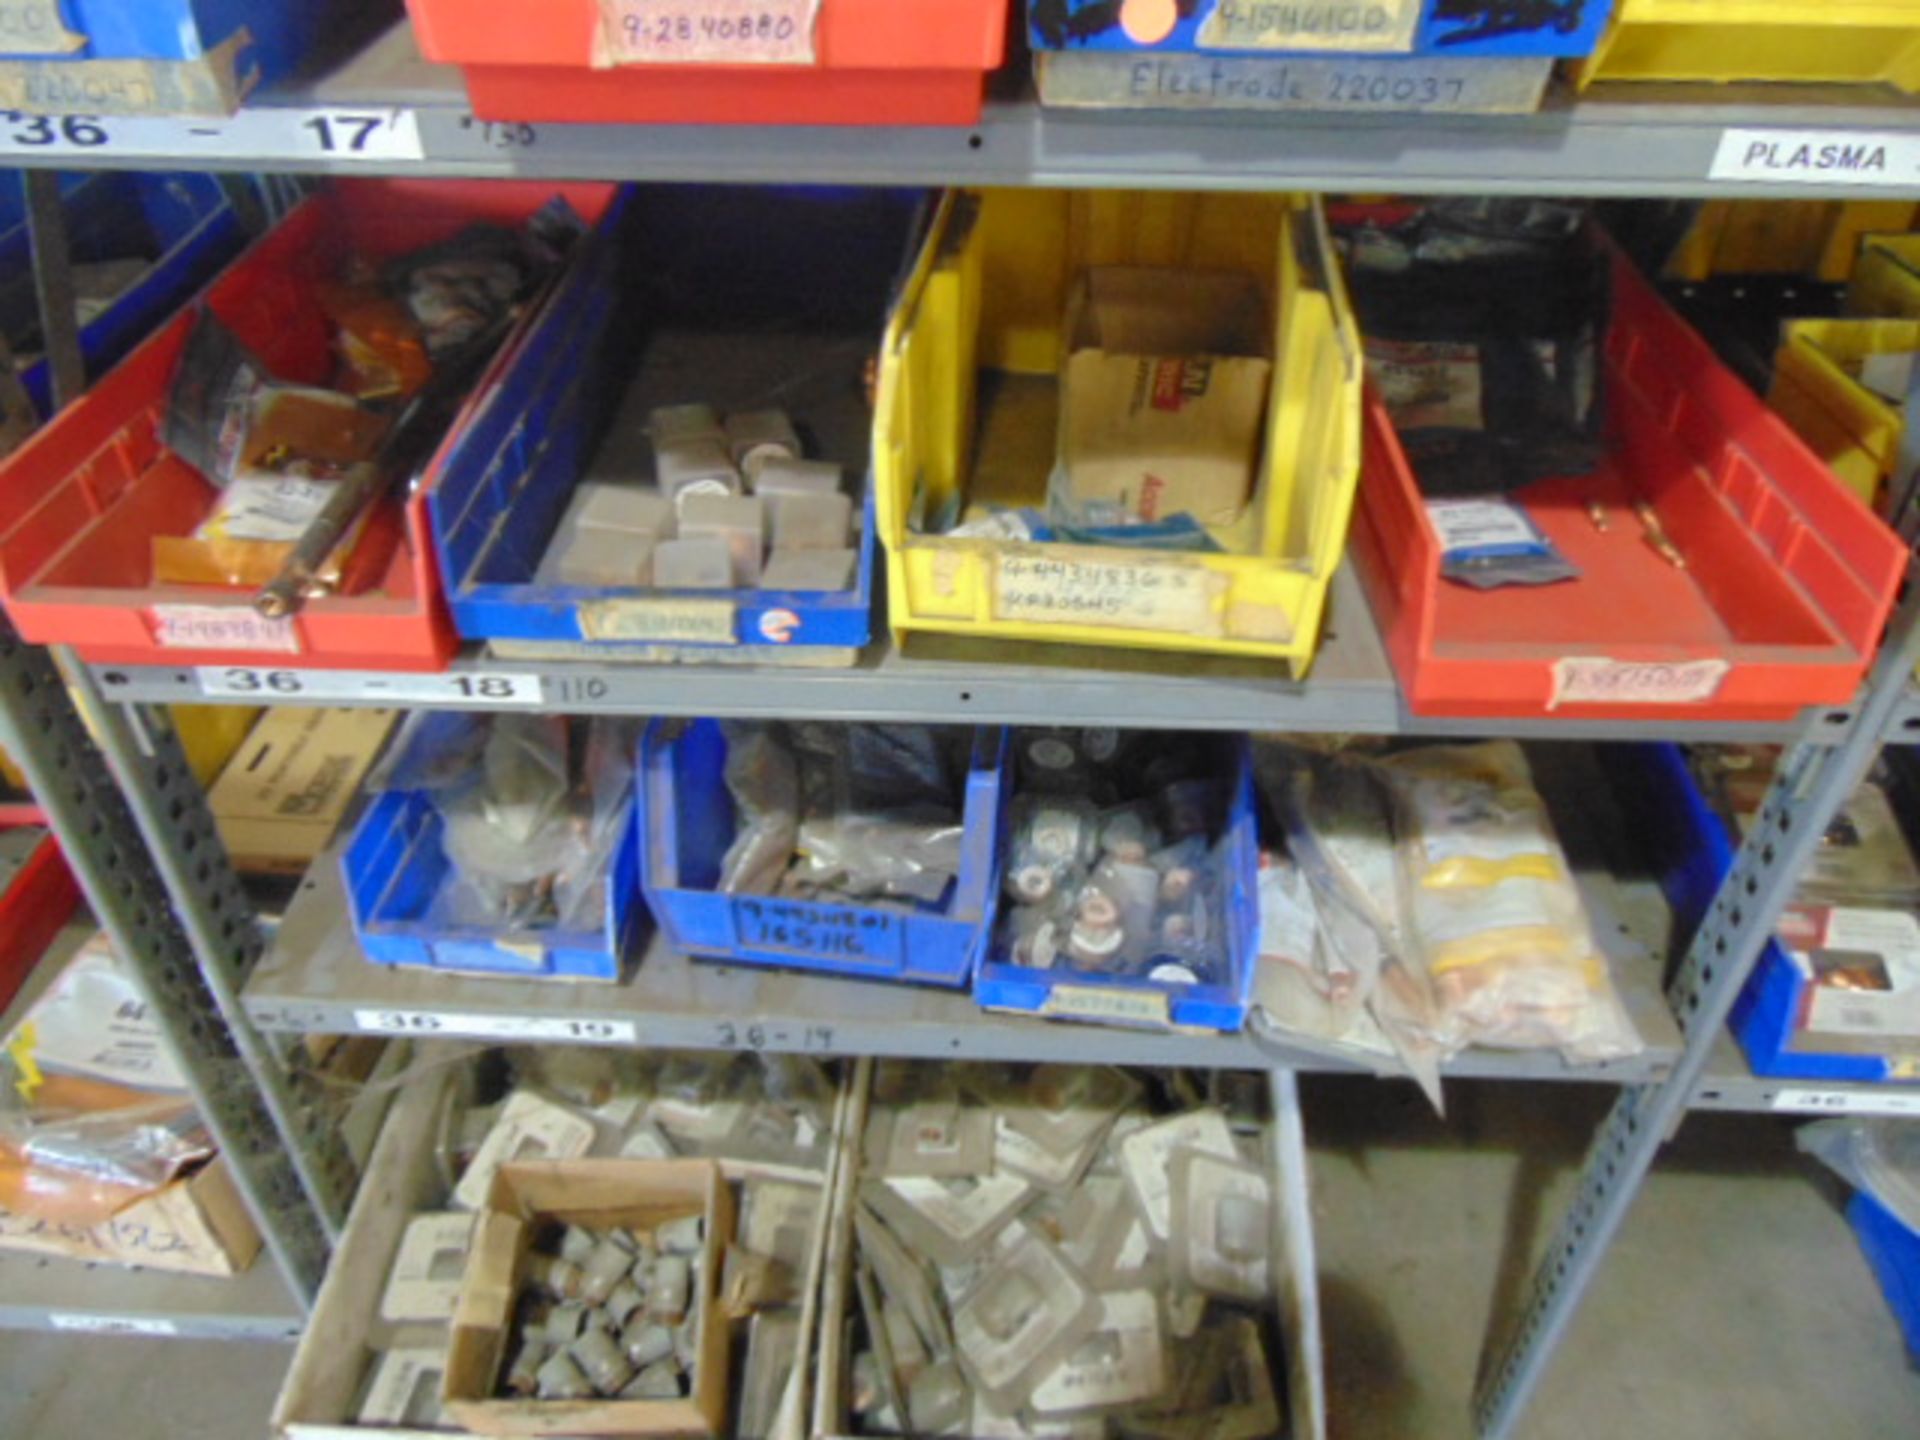 LOT OF PLASMA REPLACEMENT PARTS, assorted (in one section of shelving) - Image 3 of 5